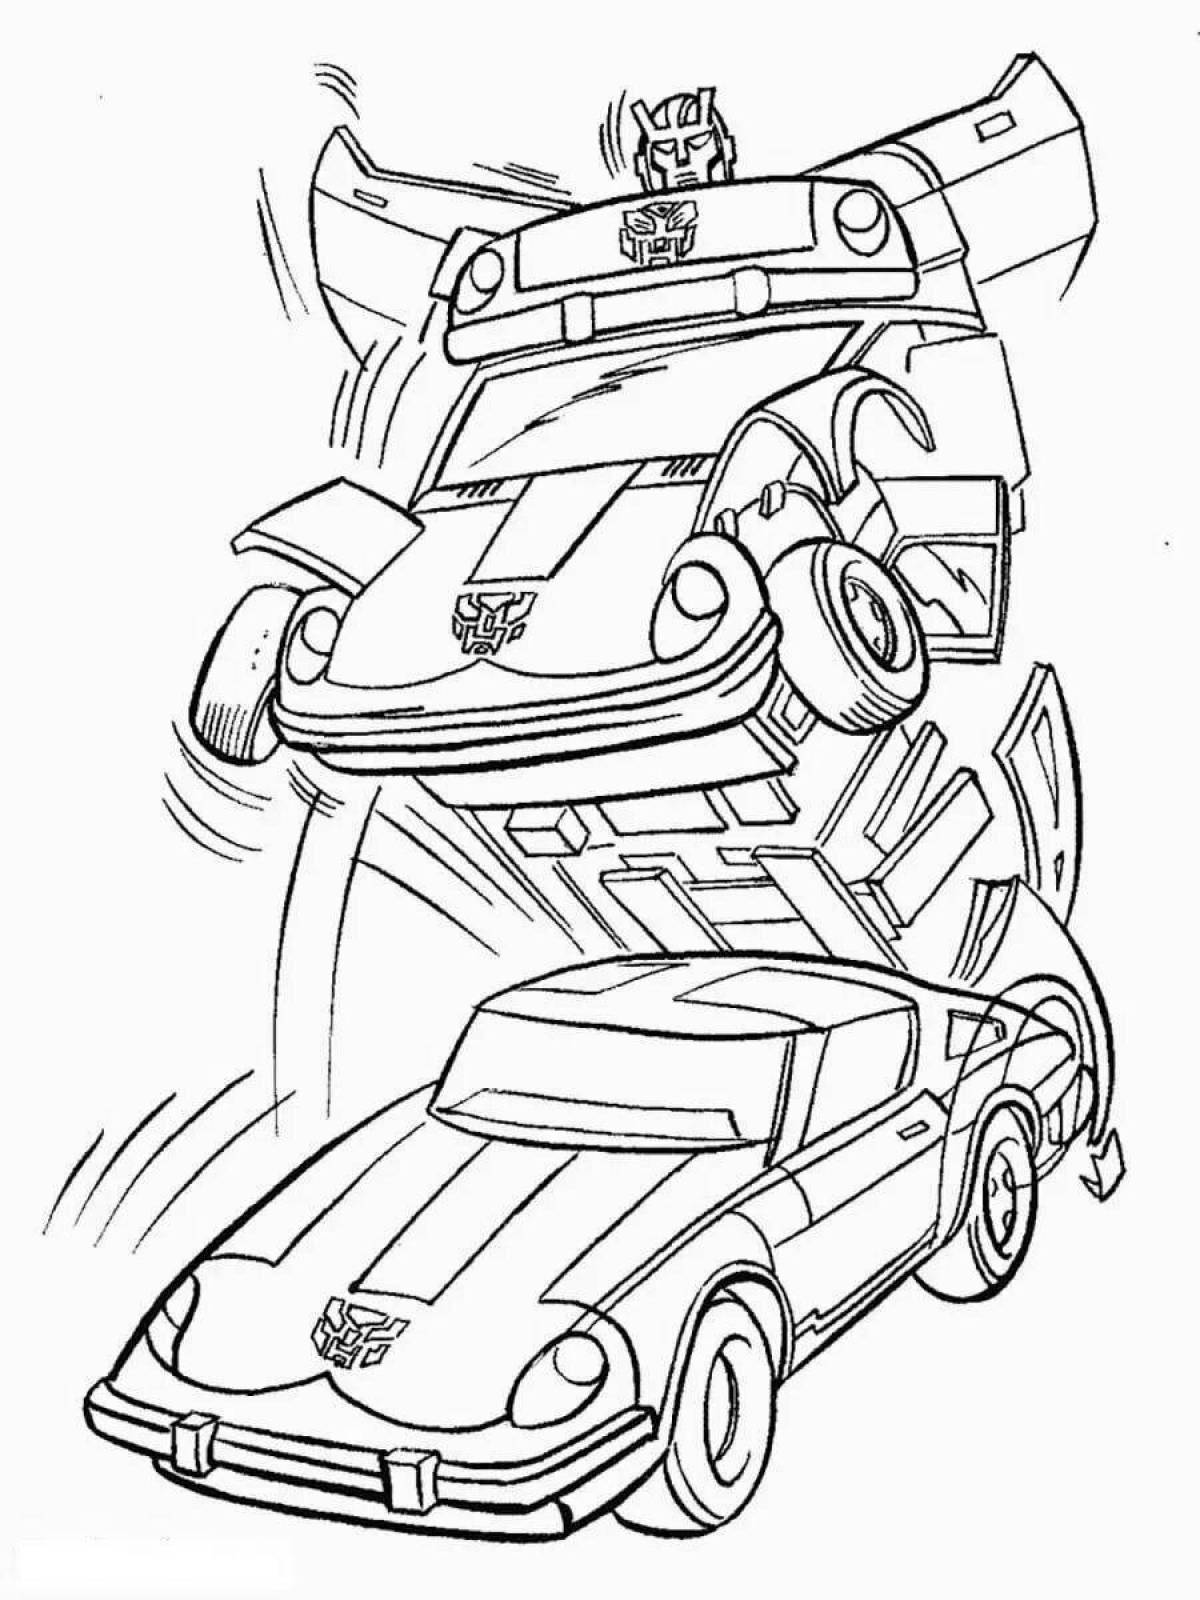 Amazing cool robot coloring page for boys